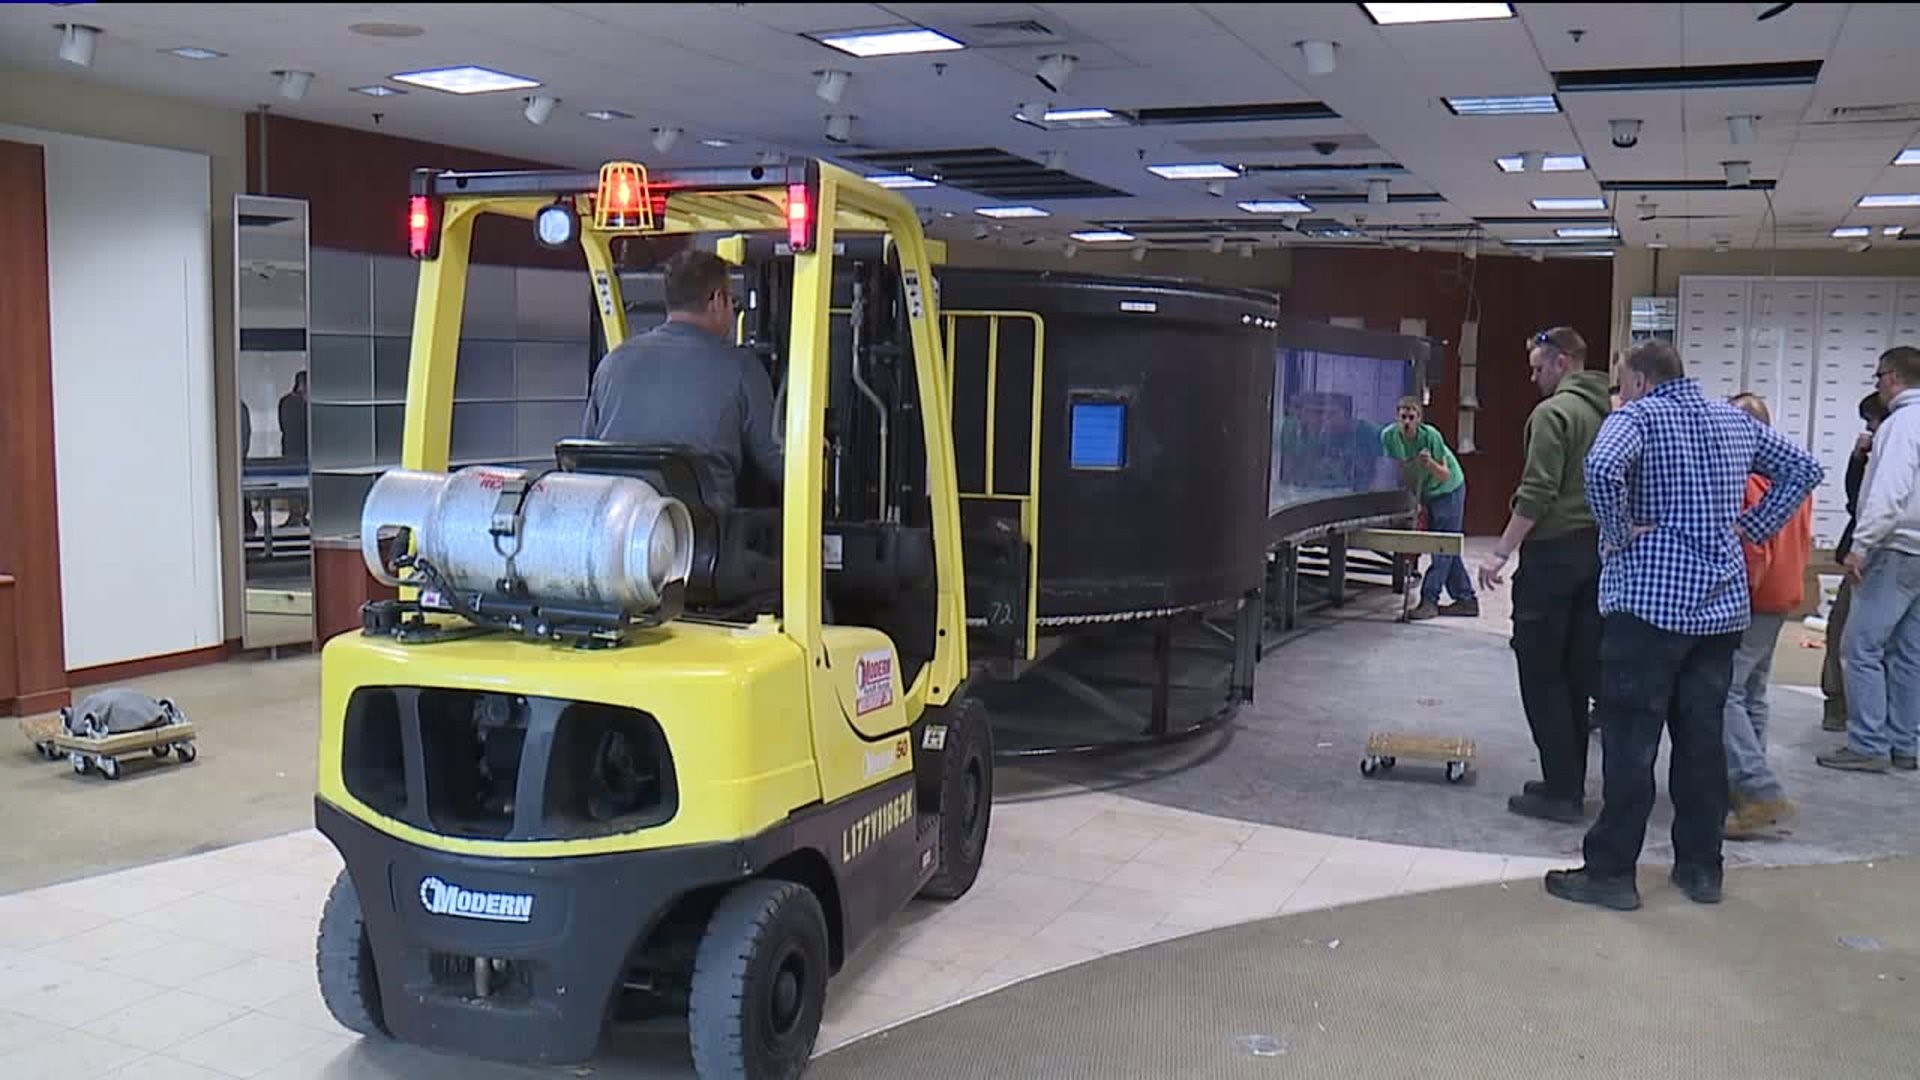 Workers Install Tanks for Electric City Aquarium